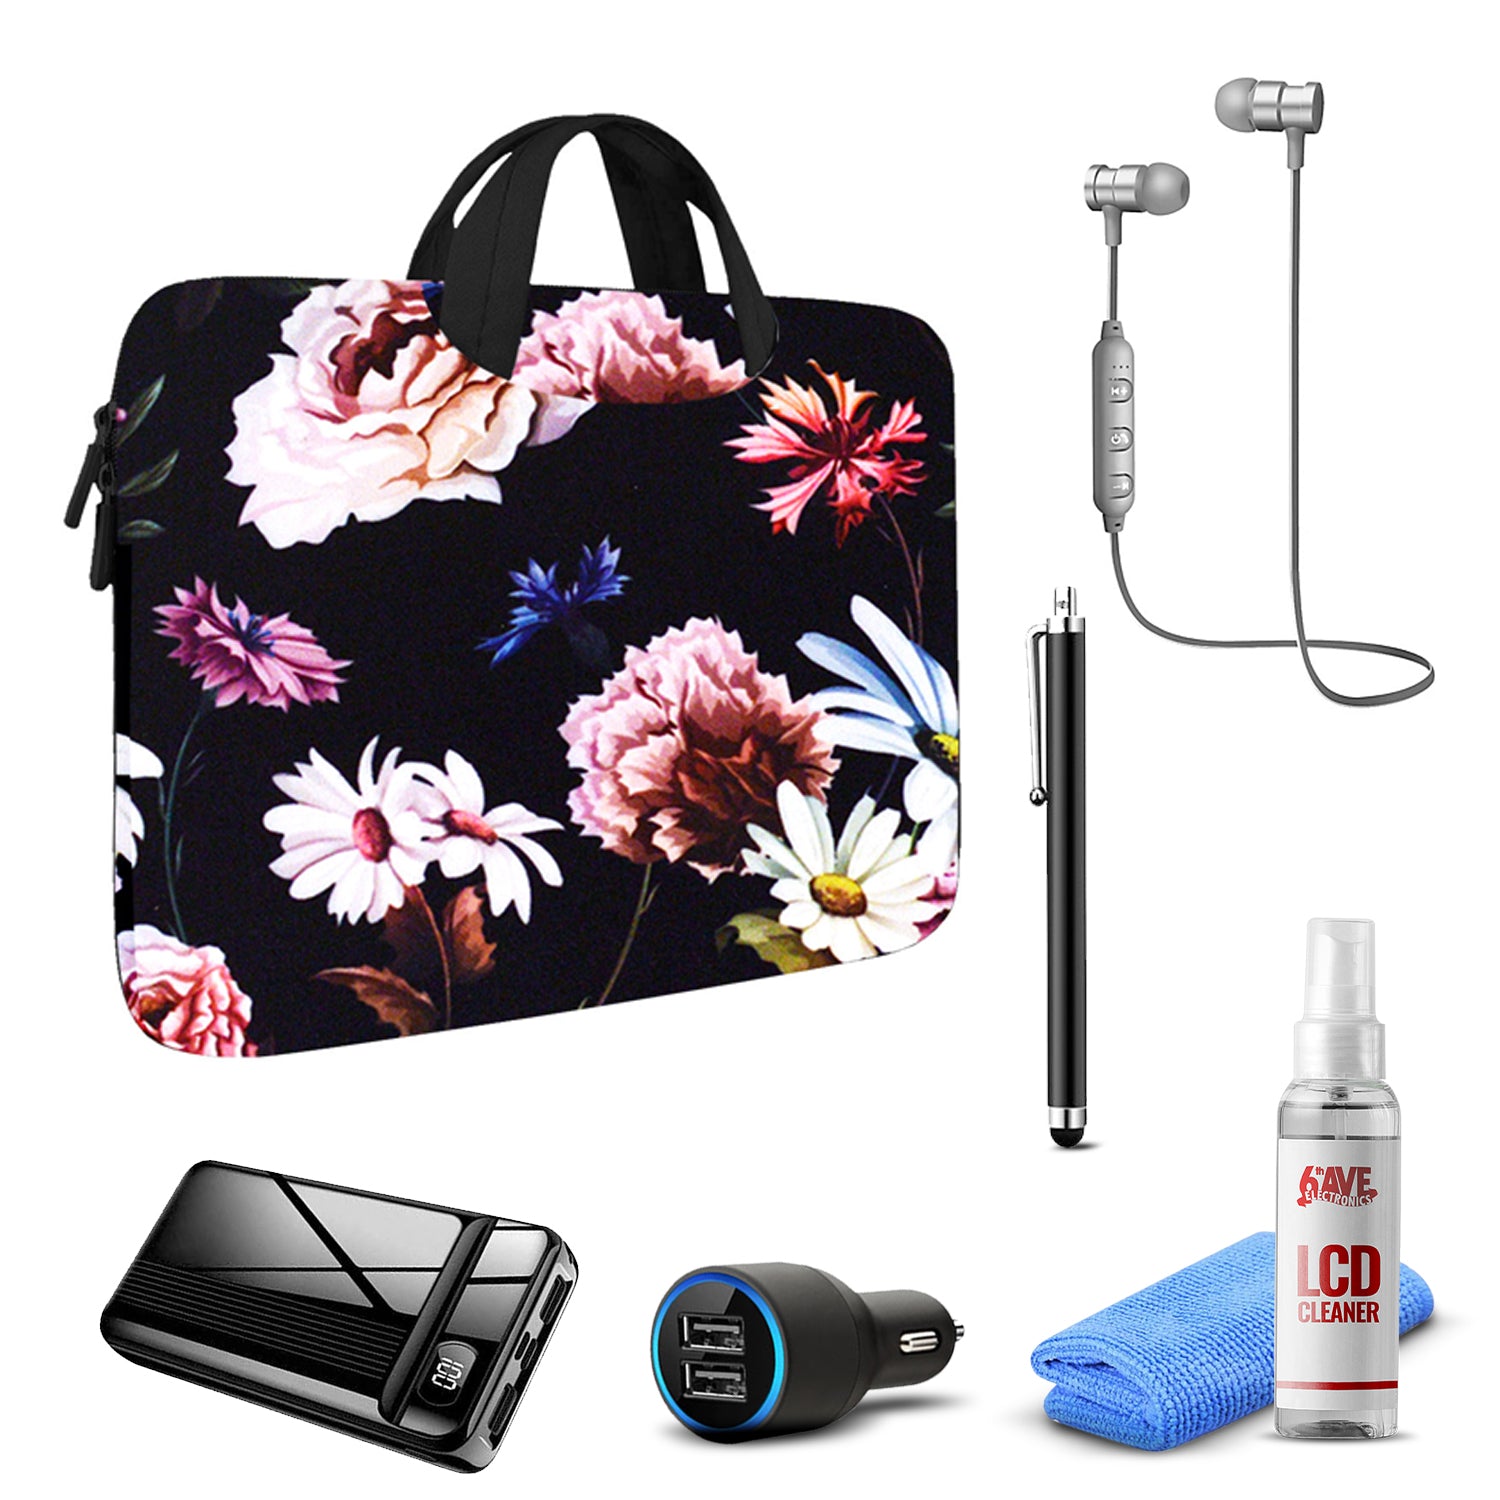 Tablet Travel Accessory Bundle with Black Floral Sleeve